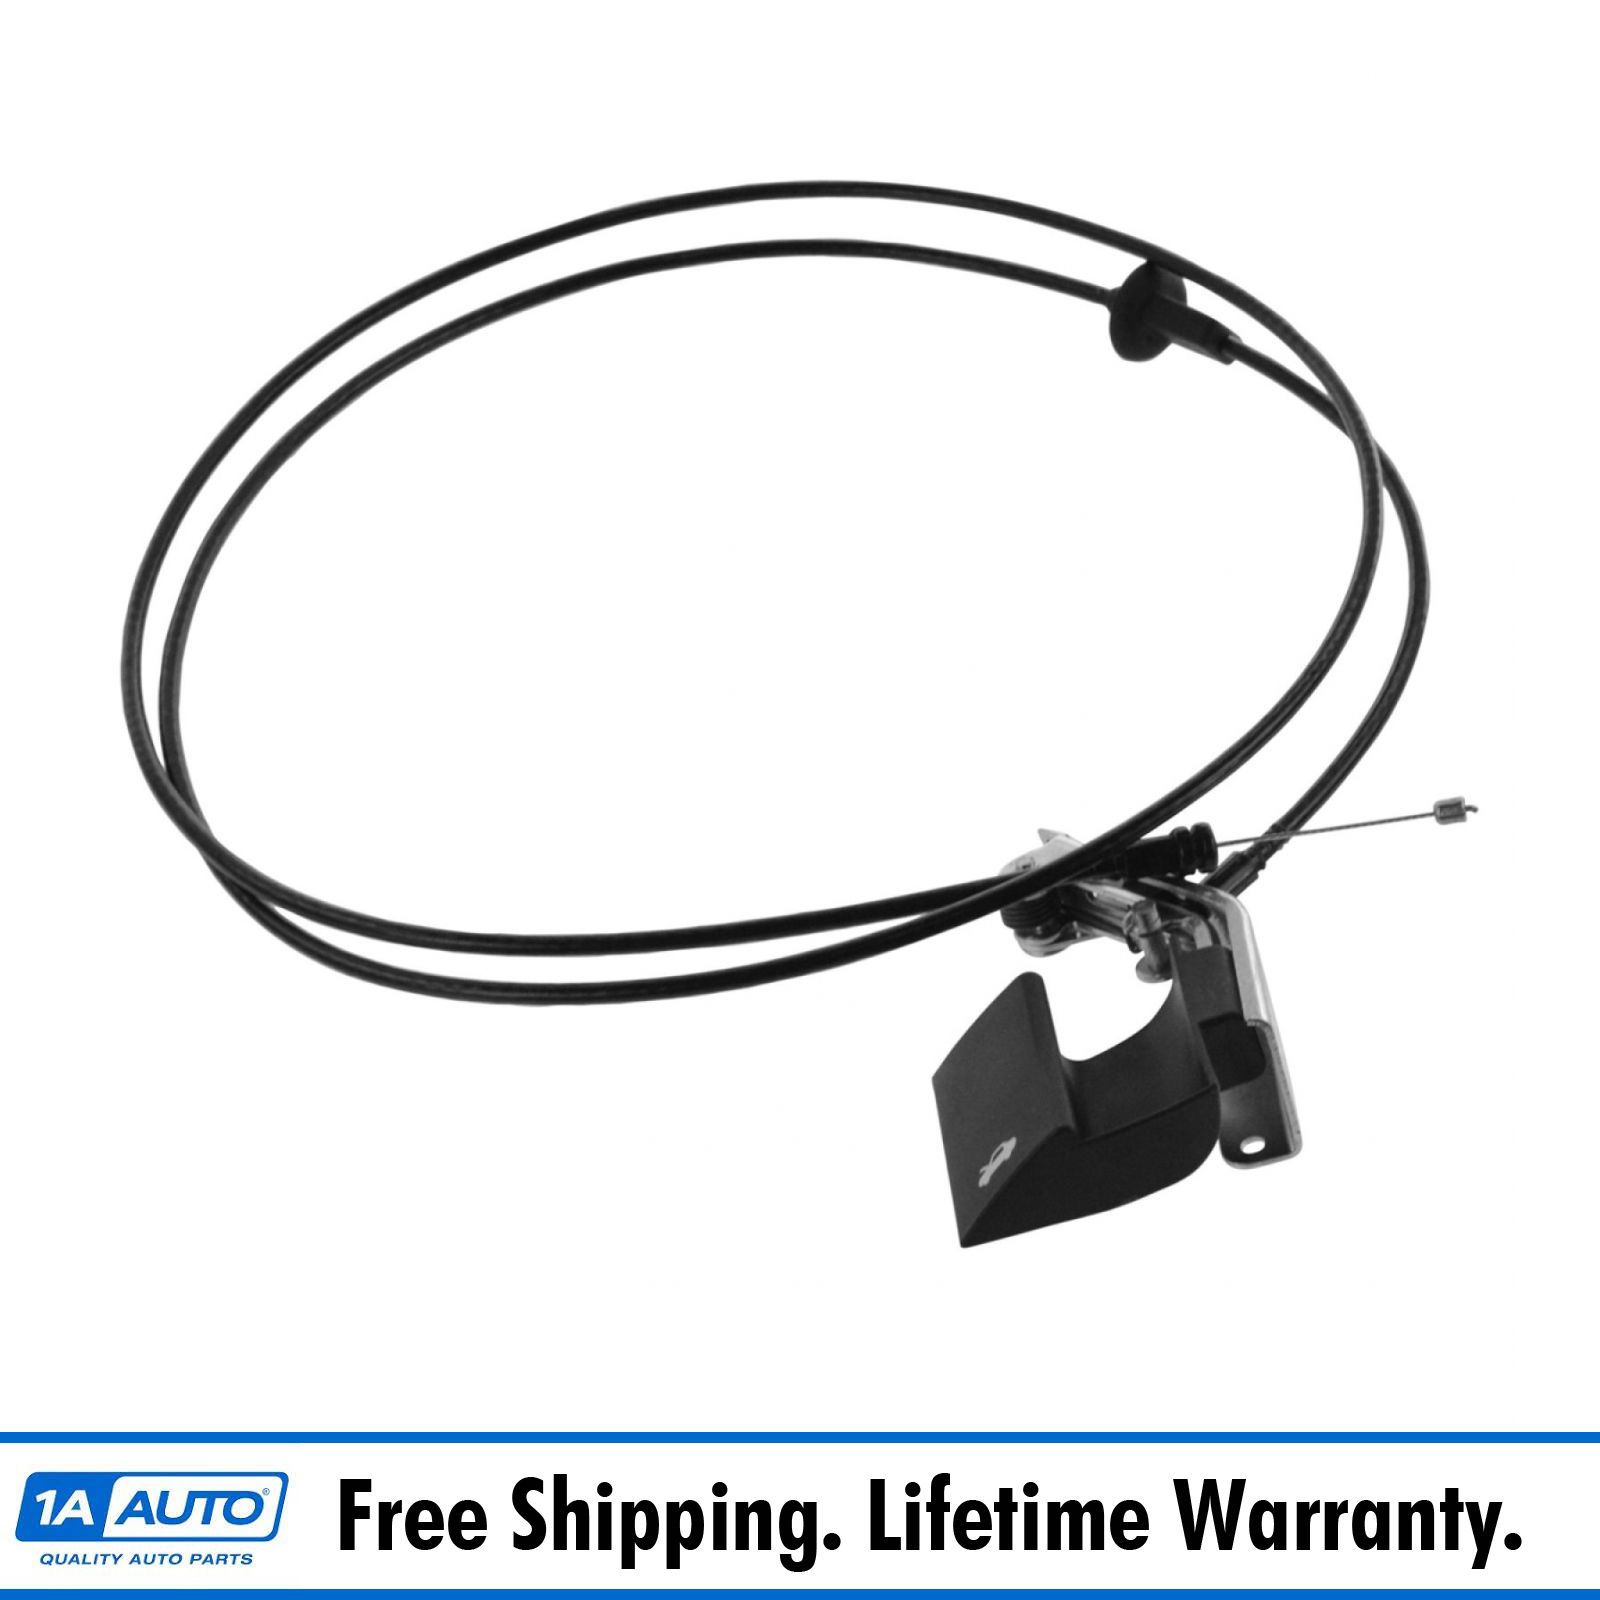 Cadillac Cts Hood Latch Wiring from onea-ebay-images.s3.amazonaws.com